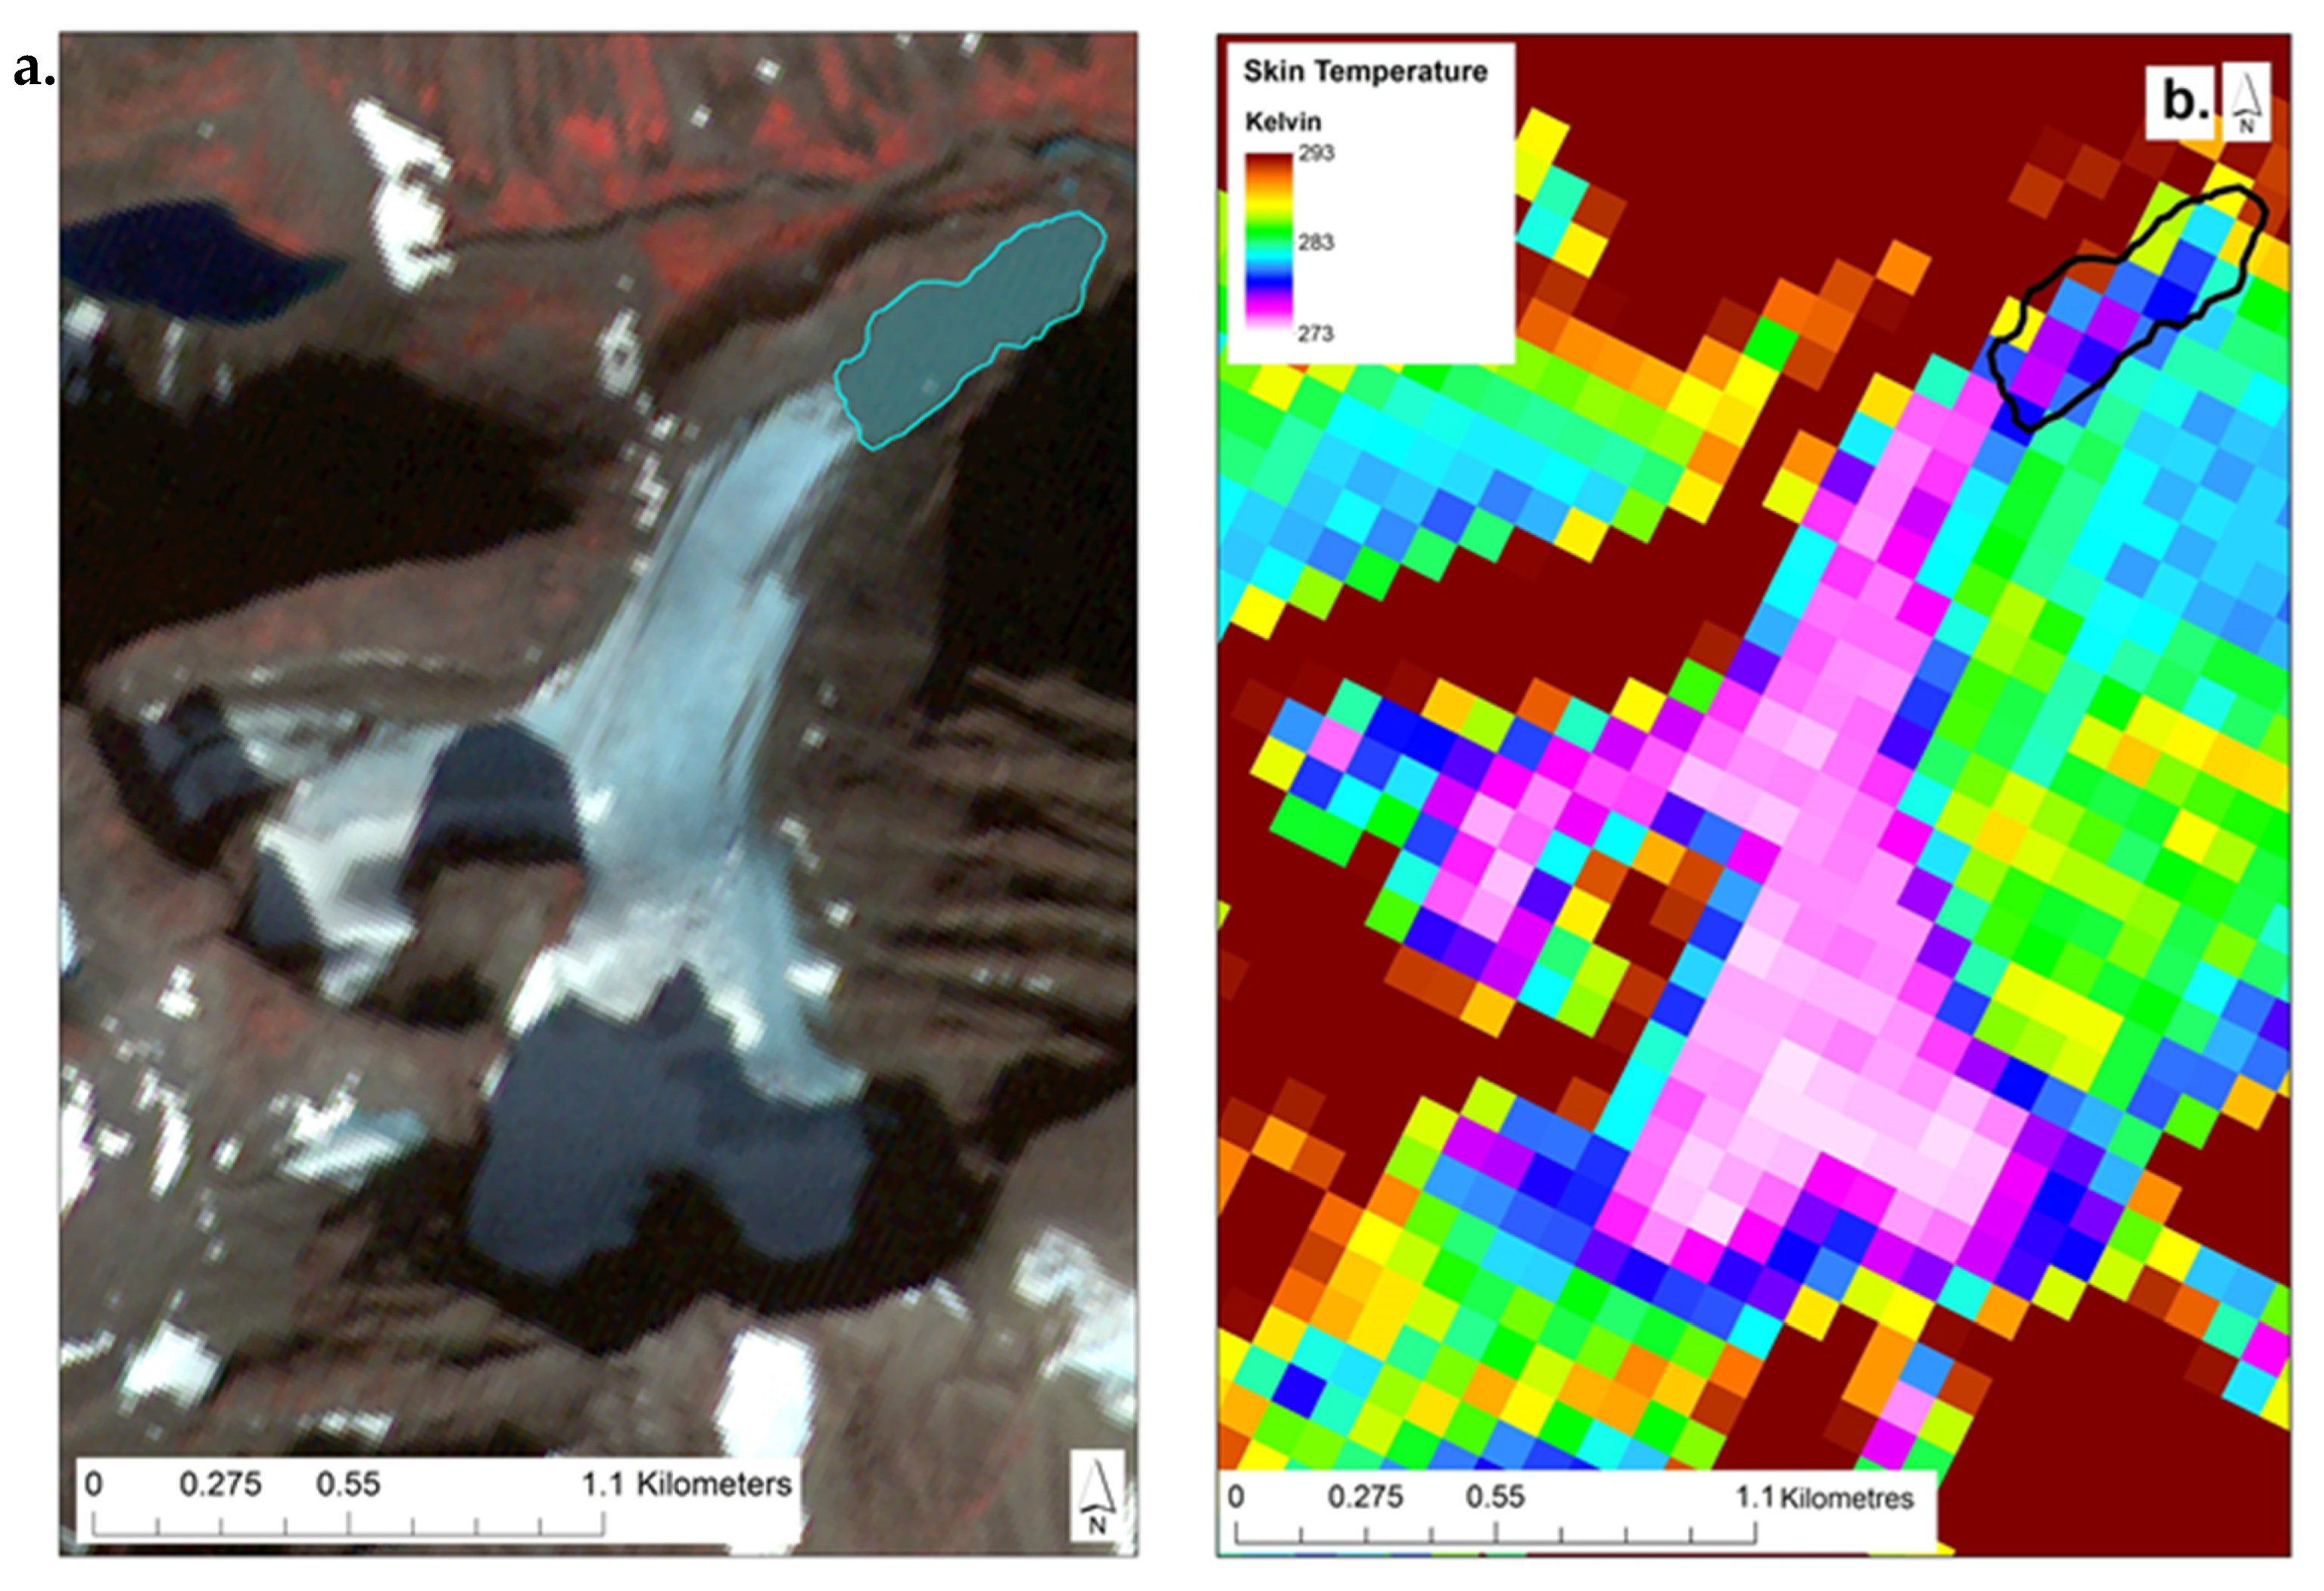 Two maps showing proglacial lake 6. The left map shows the lake with surface reflectance data. The right map shows the same lake with land surface temperature data.